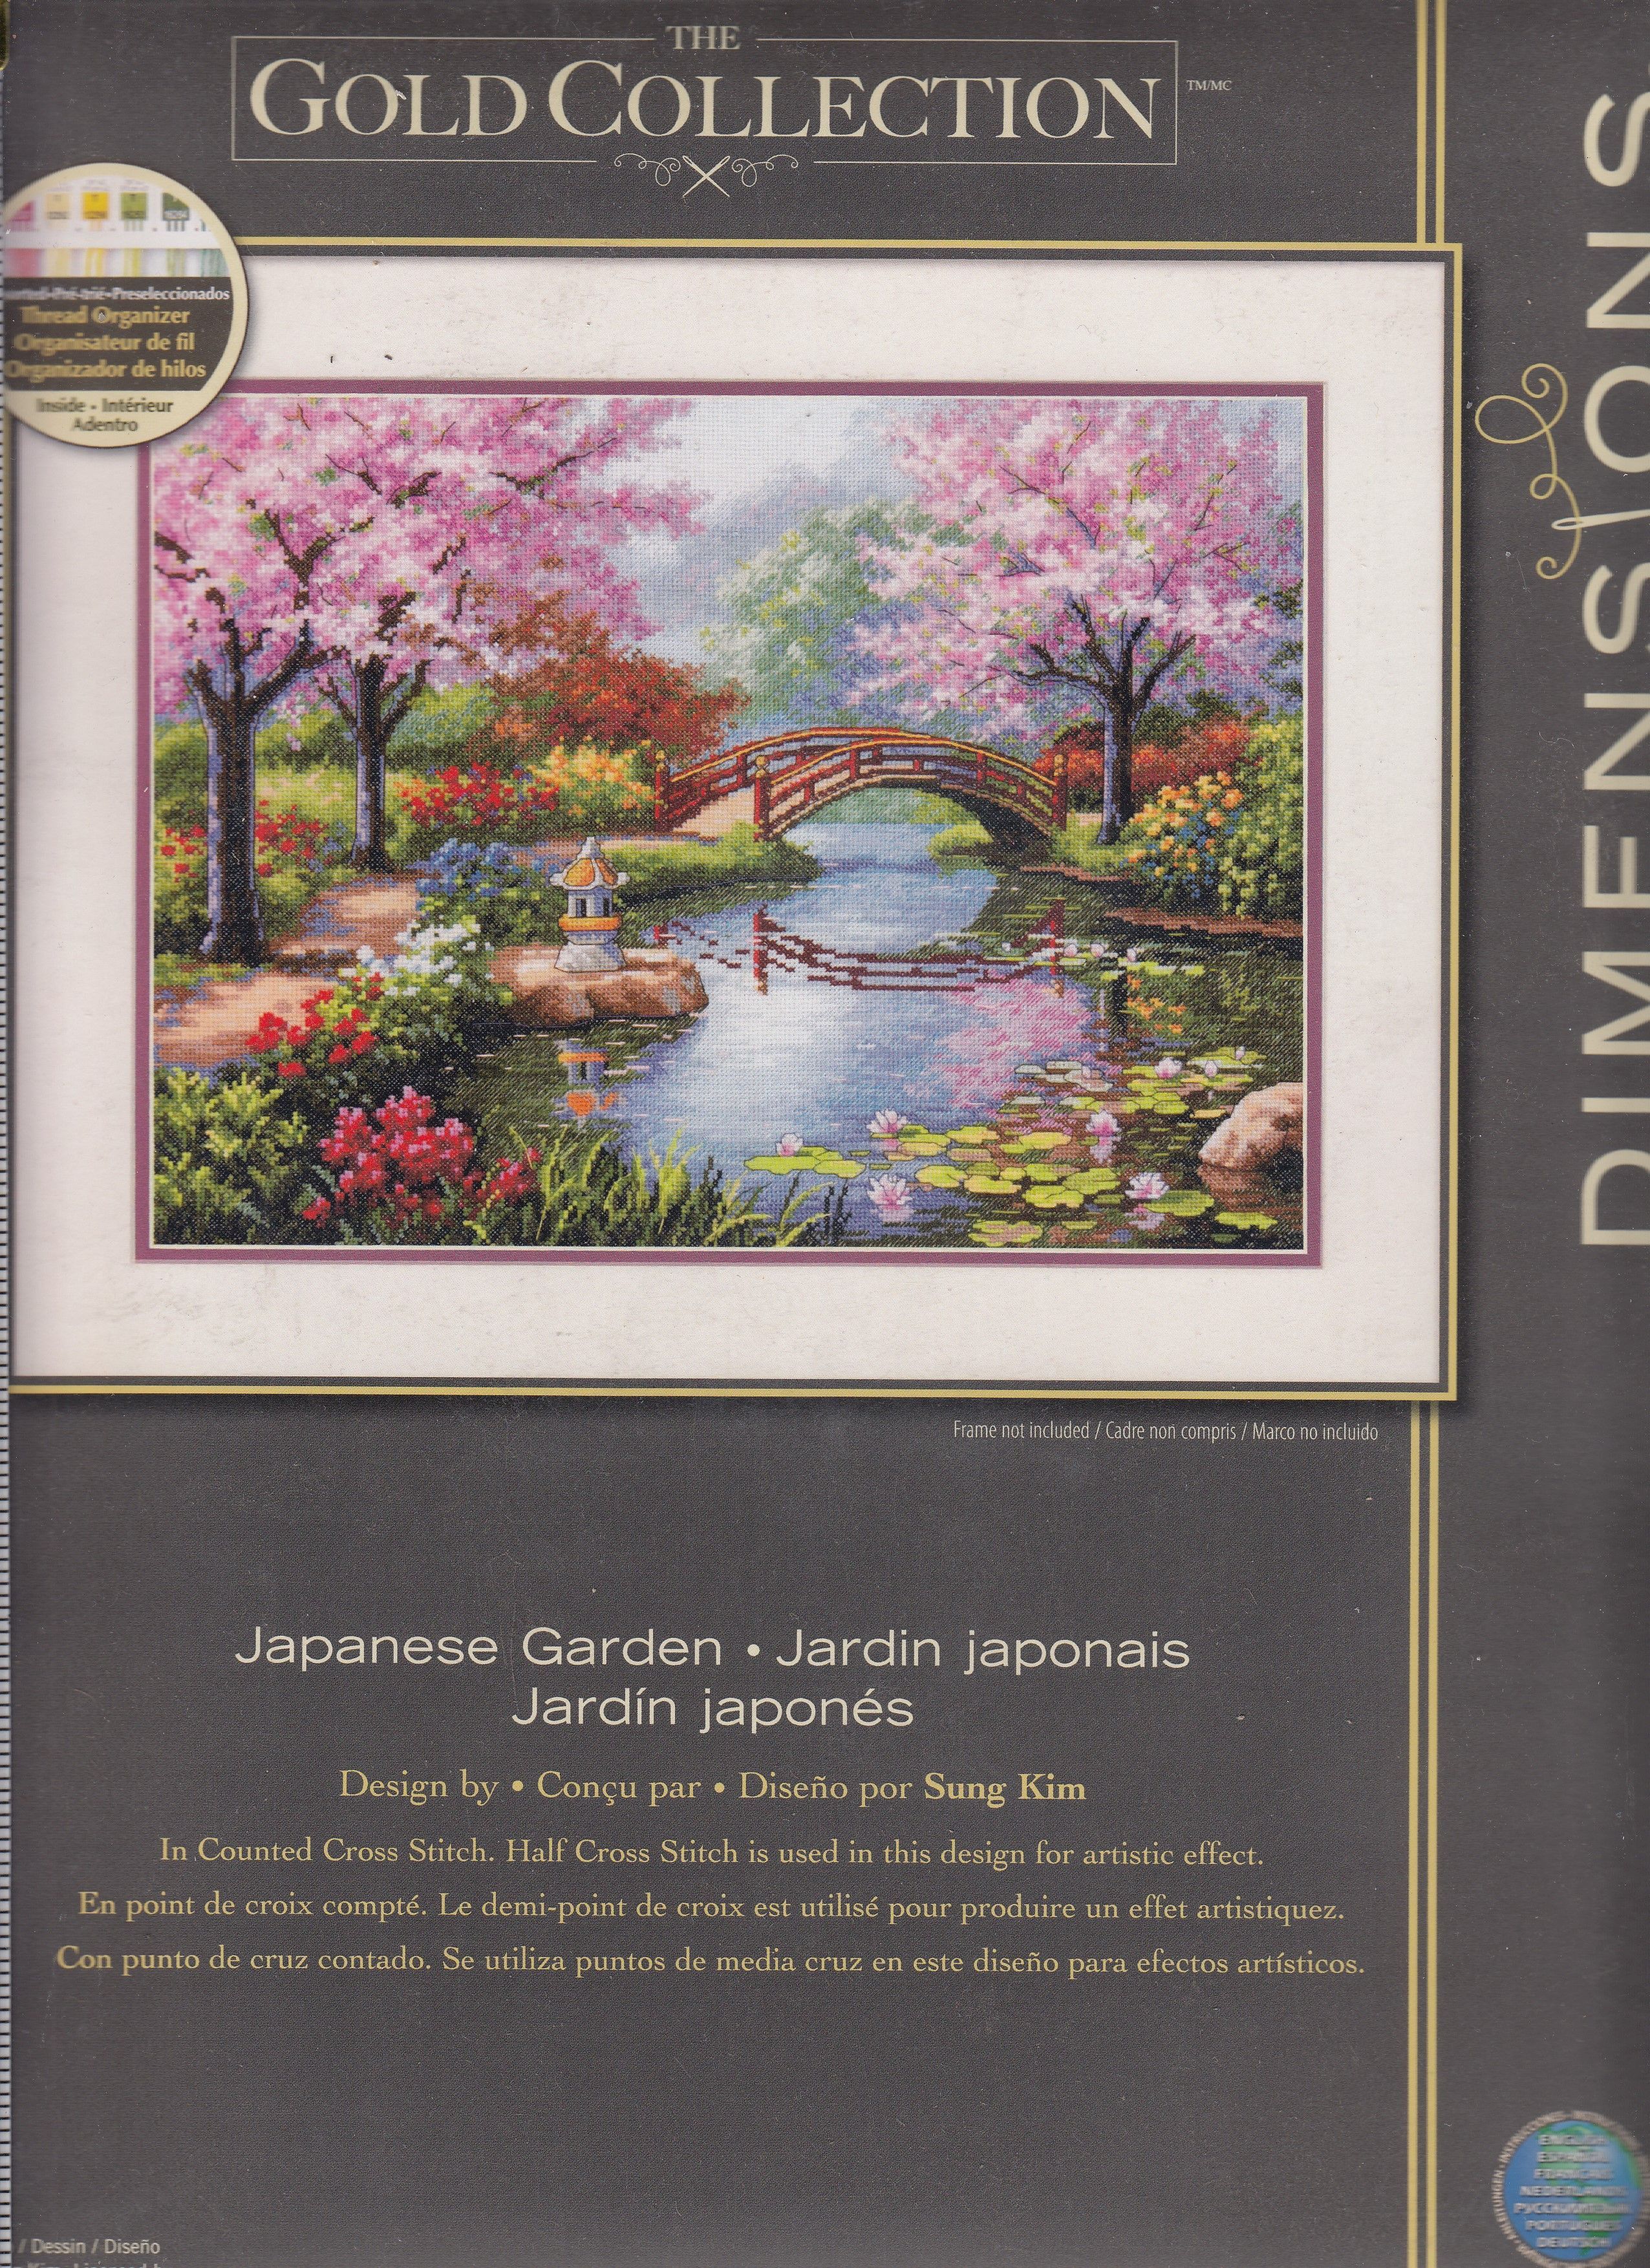 Dimensions Gold Collection Japanese Garden Counted Cross Stitch Kit-16X12 16 Count 